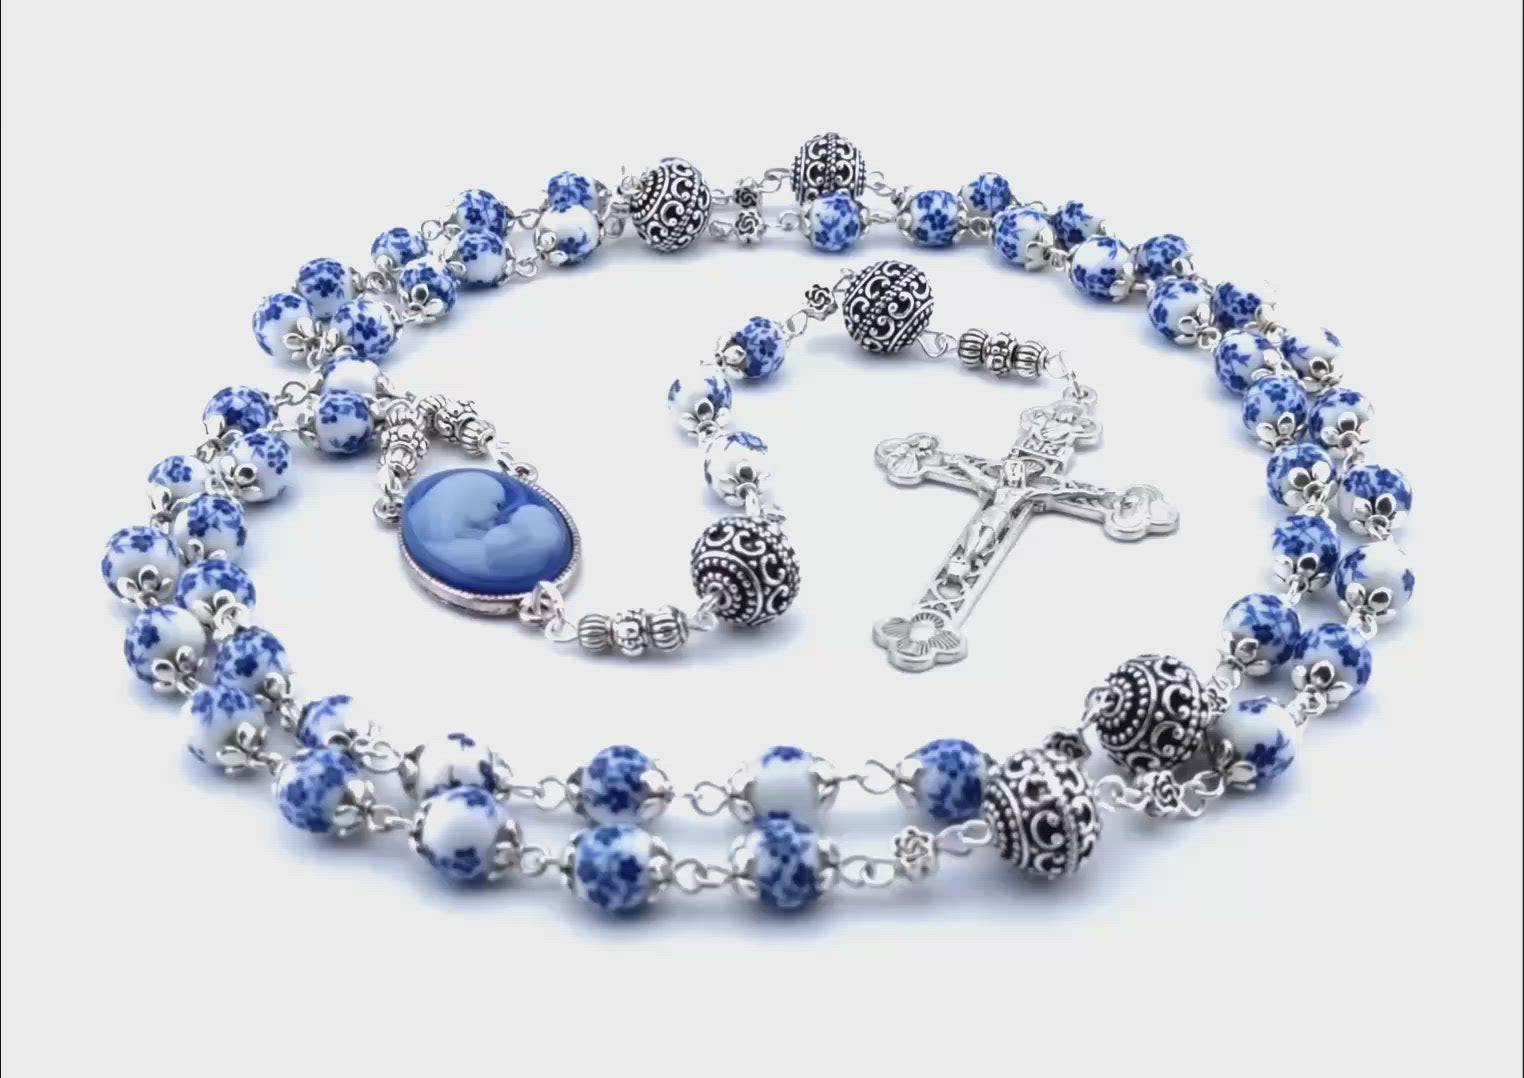 Virgin Mary and Child unique rosary beads with blue floral porcelain beads, silver pater beads, crucifix and cameo centre medal.